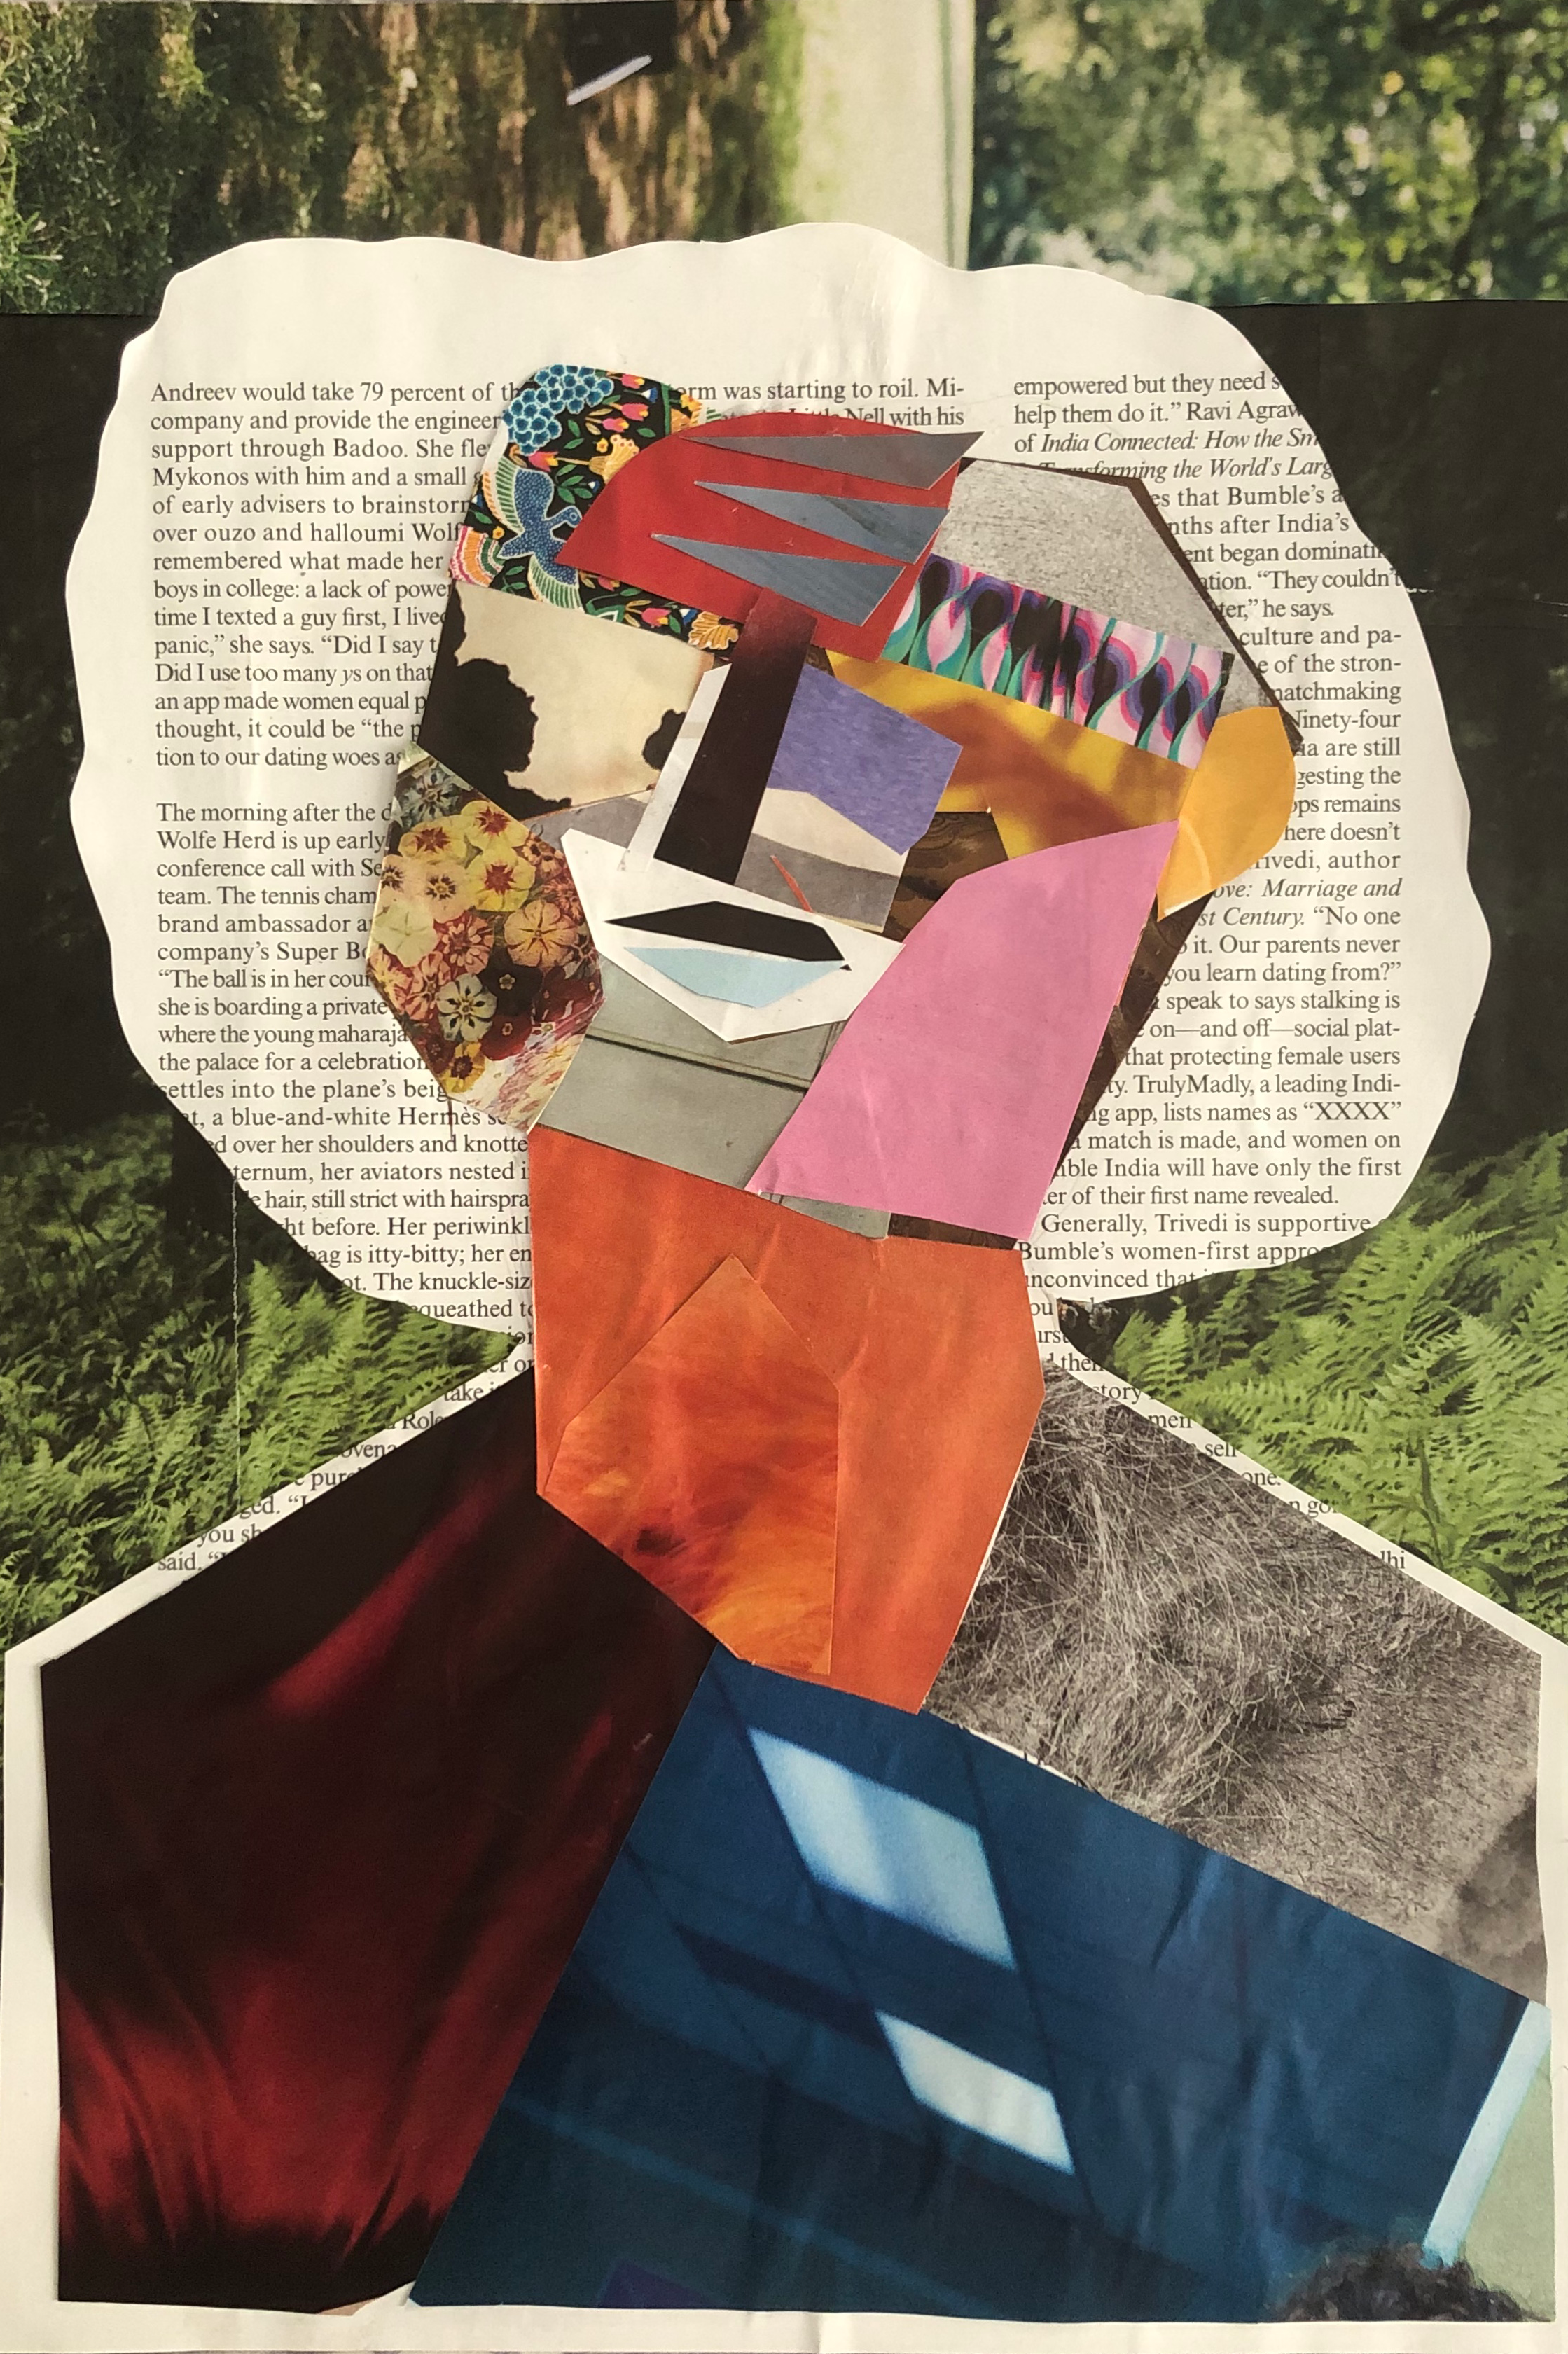 2D collage made of cut out pieces of paper reaturing various text and images put together to resemble a face and hair